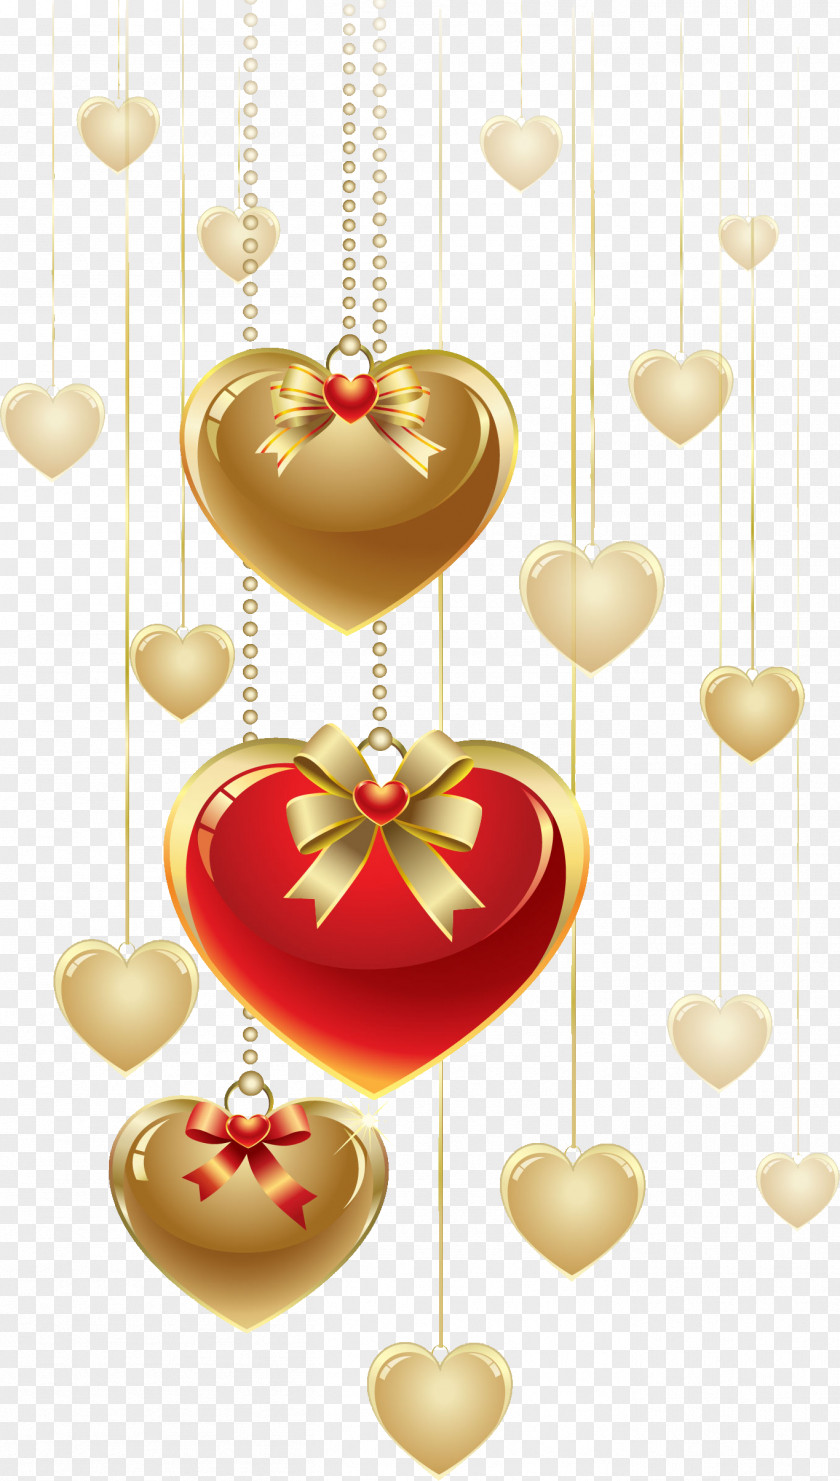 Gold Heart Valentine's Day Clip Art PNG